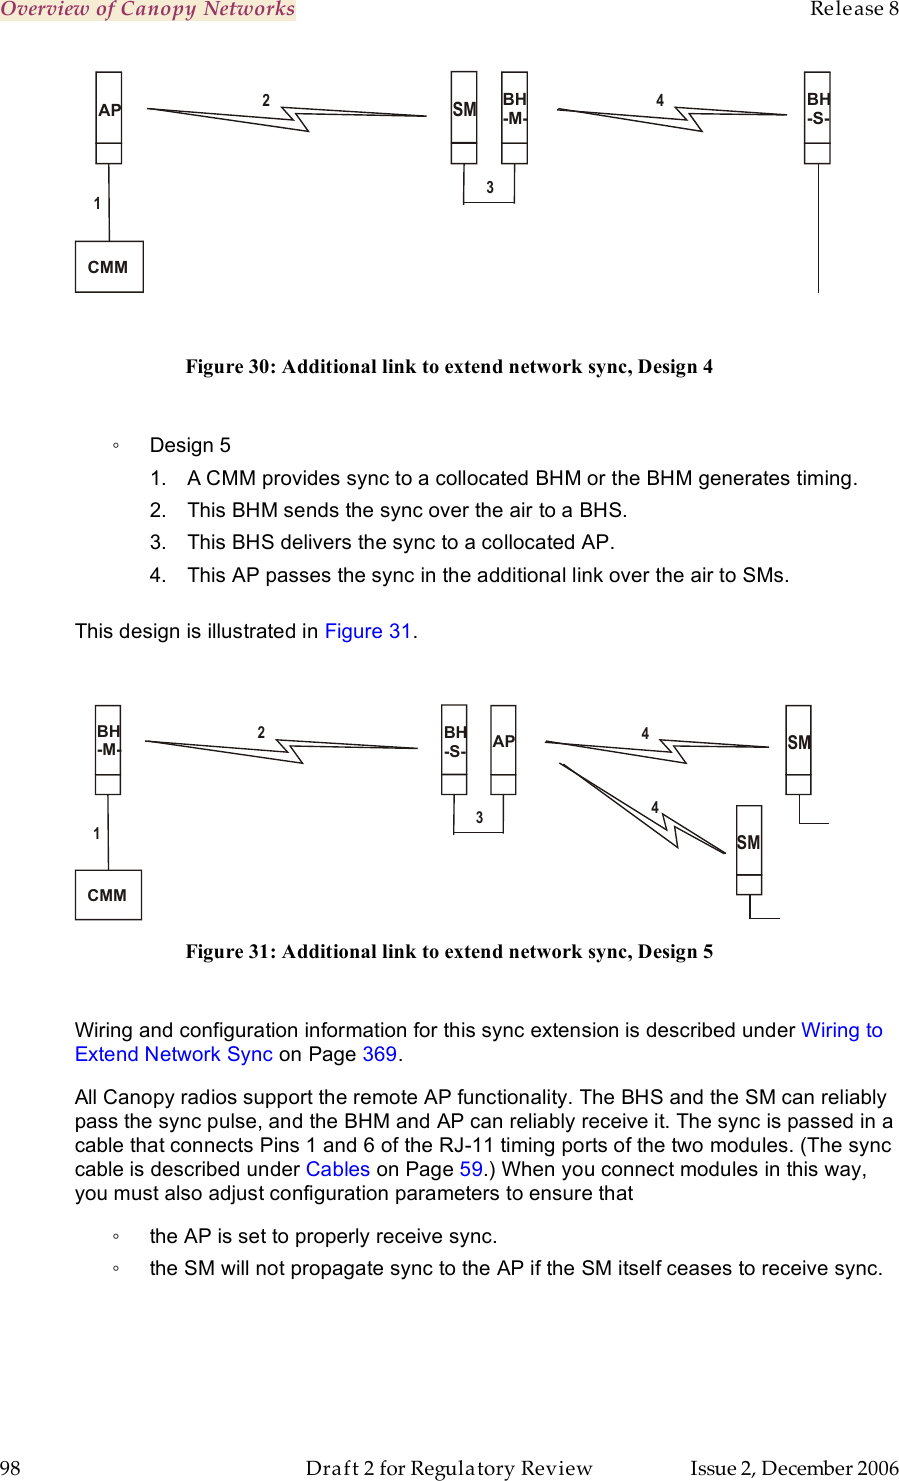 Overview of Canopy Networks    Release 8   98  Draft 2 for Regulatory Review  Issue 2, December 2006 CMMBH-M-AP BH-S-SM2134  Figure 30: Additional link to extend network sync, Design 4  ◦  Design 5 1.  A CMM provides sync to a collocated BHM or the BHM generates timing. 2.  This BHM sends the sync over the air to a BHS. 3.  This BHS delivers the sync to a collocated AP. 4.  This AP passes the sync in the additional link over the air to SMs.  This design is illustrated in Figure 31.  CMMBH-M- APBH-S- SMSM21344 Figure 31: Additional link to extend network sync, Design 5  Wiring and configuration information for this sync extension is described under Wiring to Extend Network Sync on Page 369.  All Canopy radios support the remote AP functionality. The BHS and the SM can reliably pass the sync pulse, and the BHM and AP can reliably receive it. The sync is passed in a cable that connects Pins 1 and 6 of the RJ-11 timing ports of the two modules. (The sync cable is described under Cables on Page 59.) When you connect modules in this way, you must also adjust configuration parameters to ensure that ◦  the AP is set to properly receive sync. ◦  the SM will not propagate sync to the AP if the SM itself ceases to receive sync. 